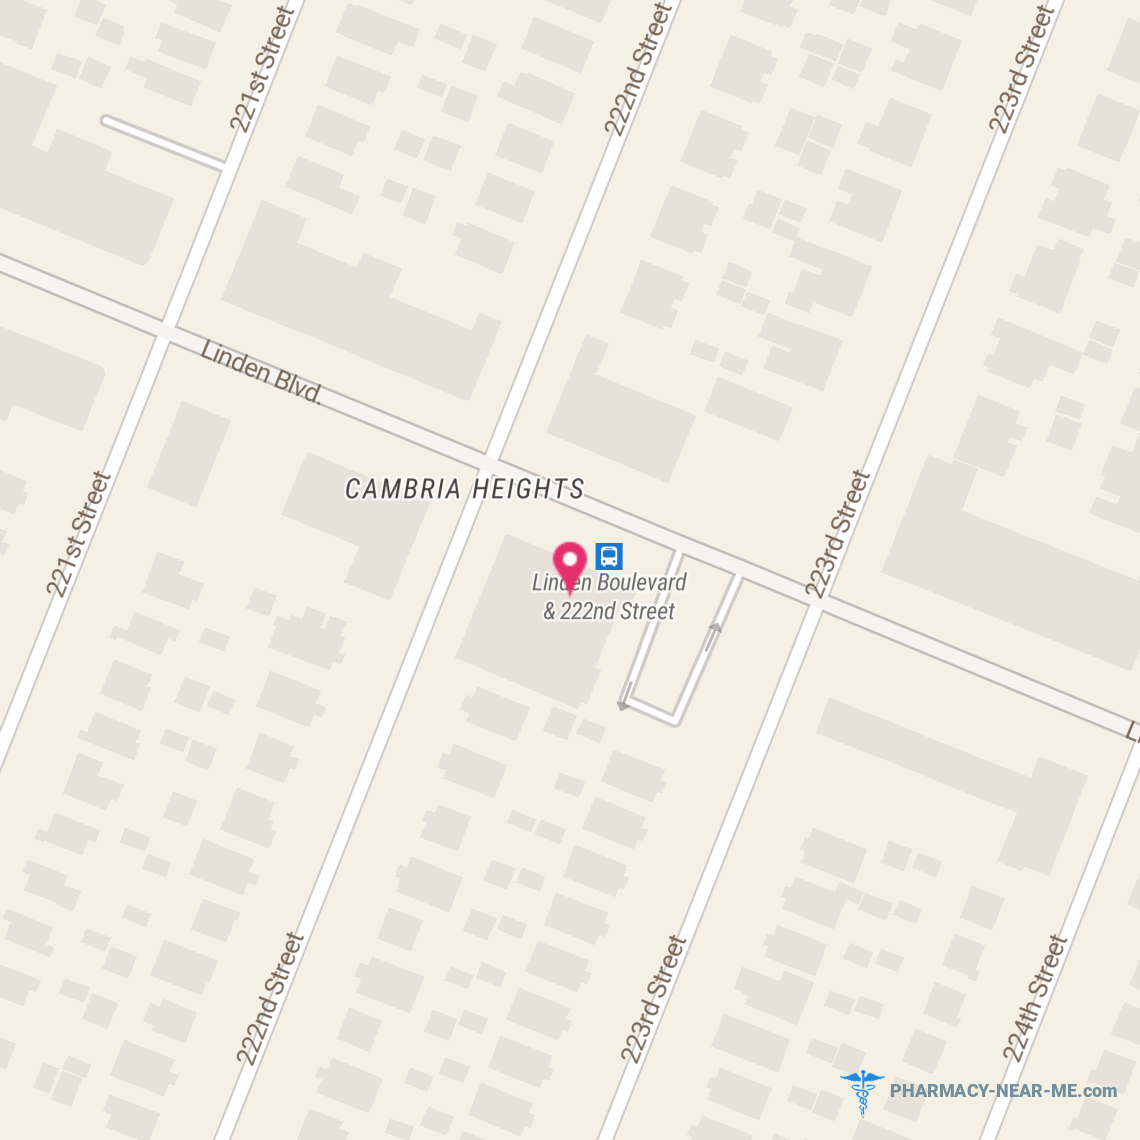 RITE AID PHARMACY 01809 - Pharmacy Hours, Phone, Reviews & Information: 222-14 Linden Boulevard, Queens, New York 11411, United States